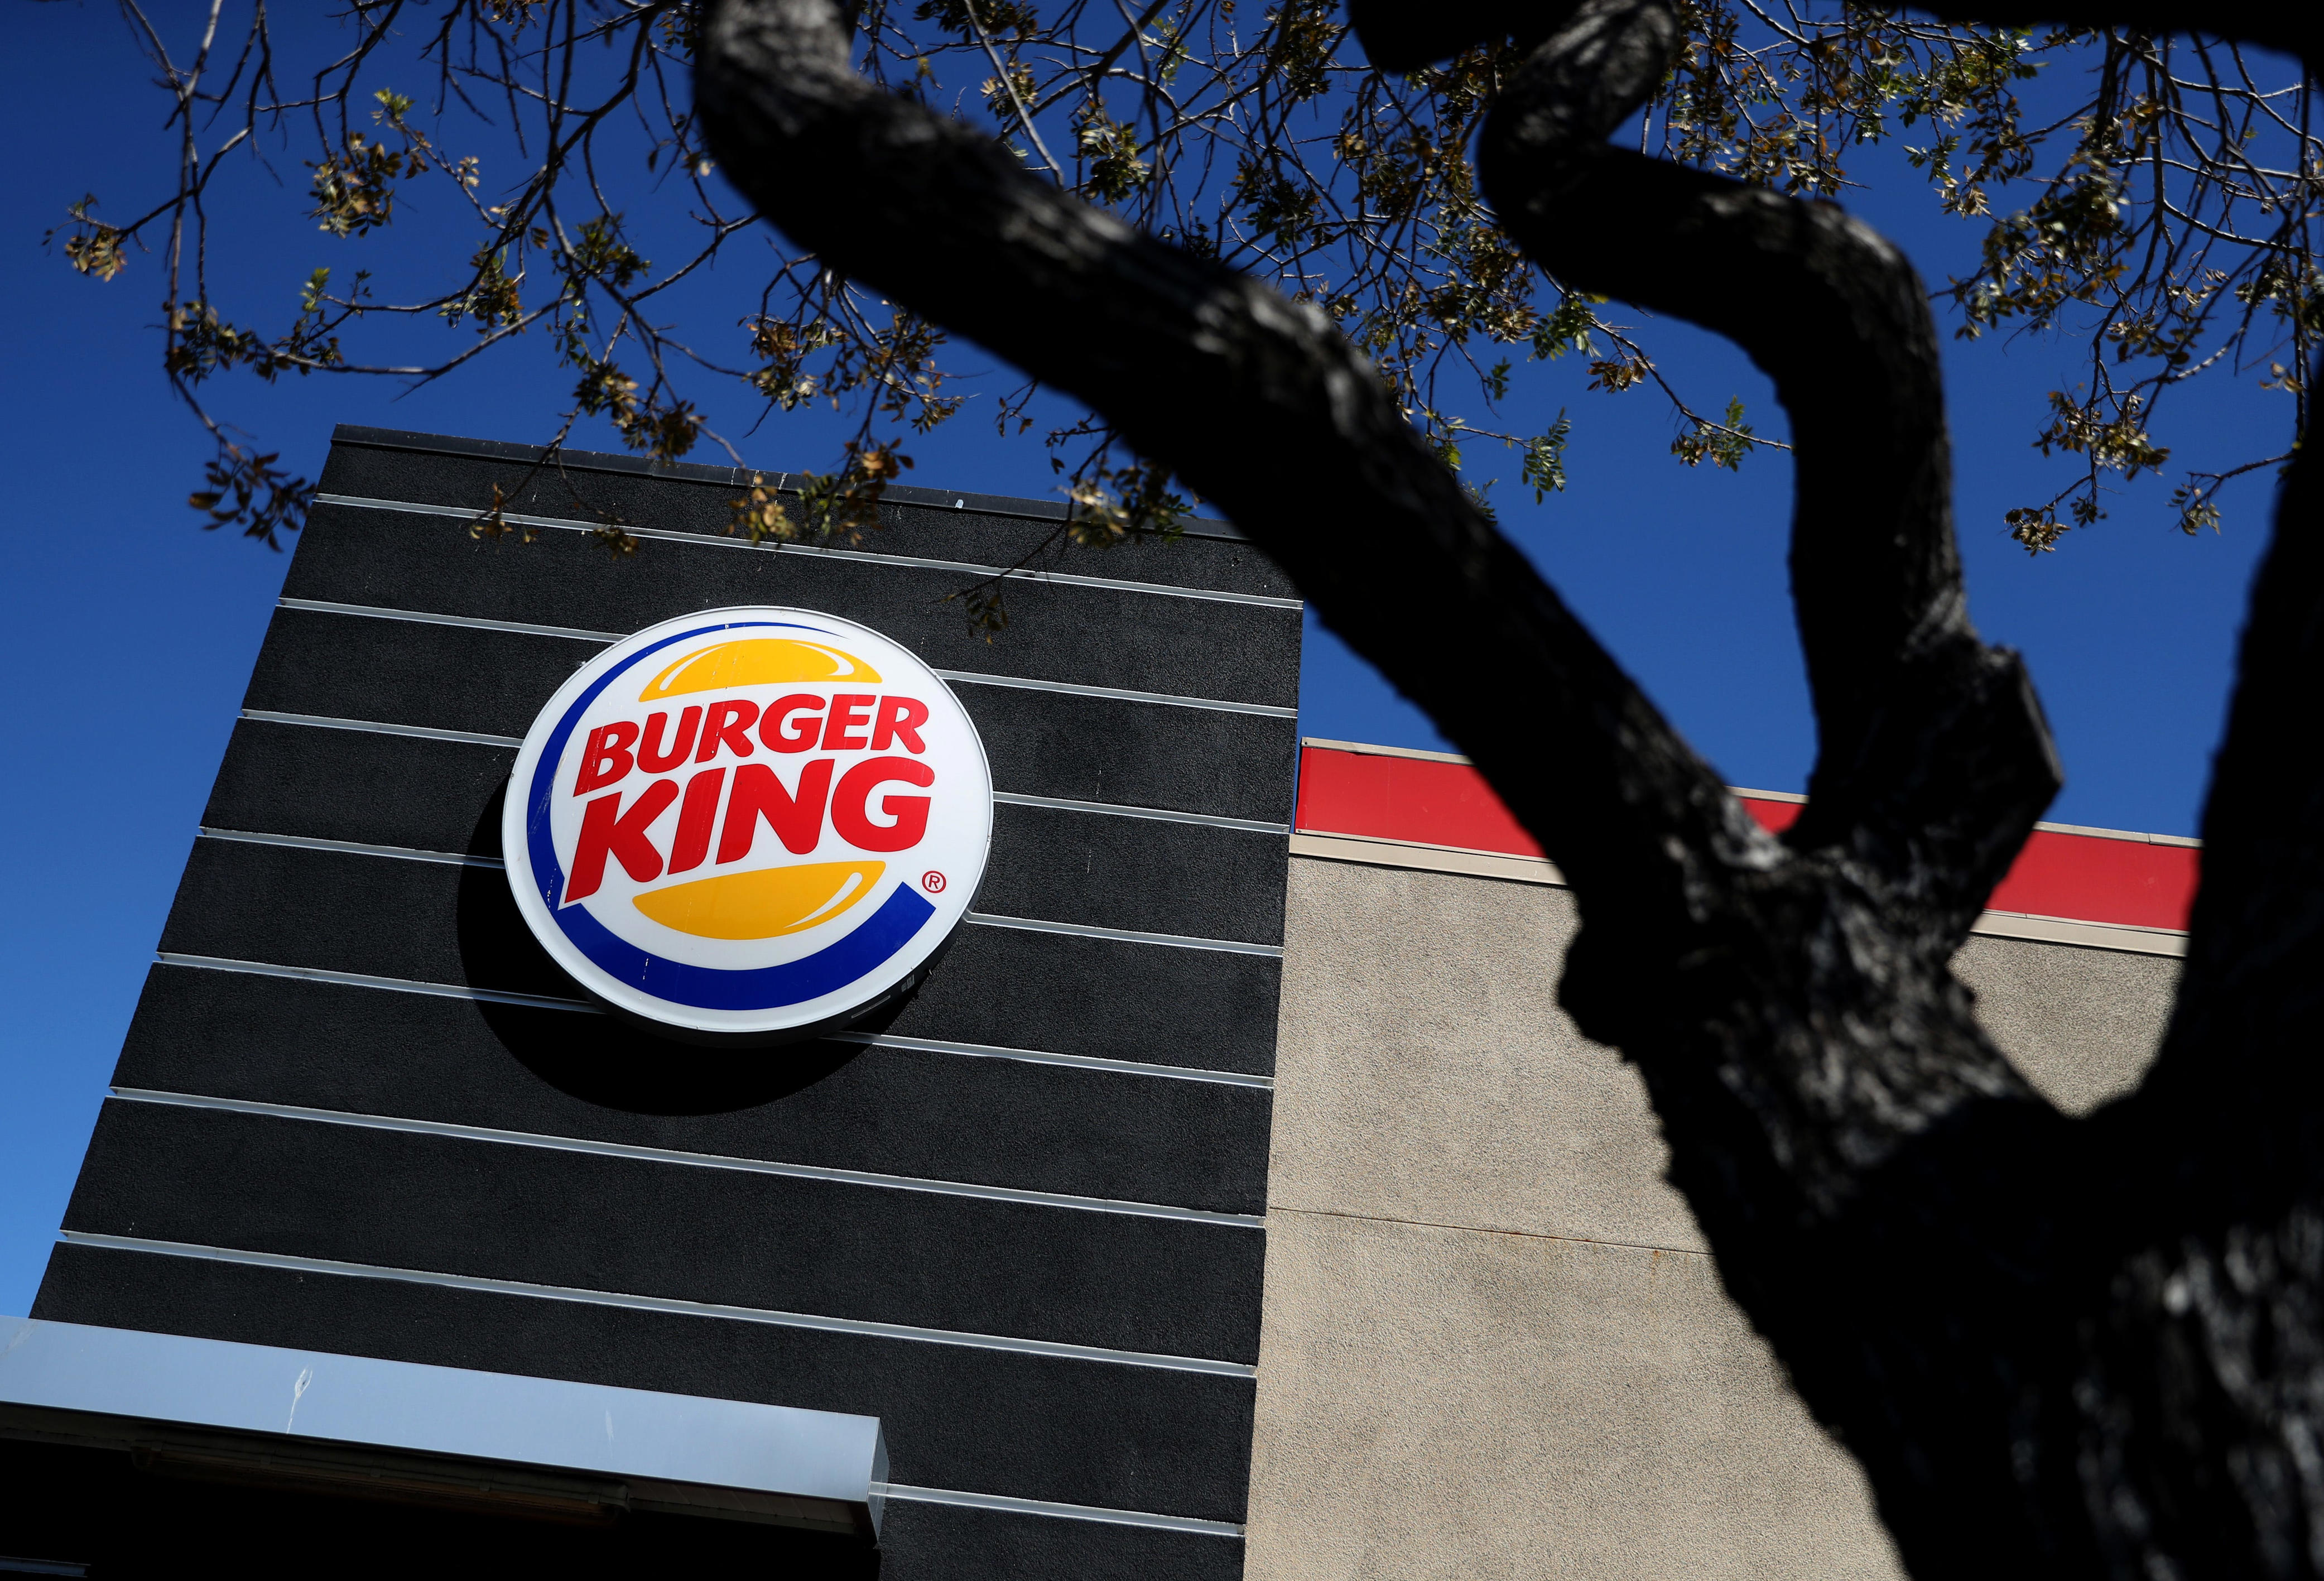 burger king offers free whopper deal in response to wendy’s 'surge pricing' backlash